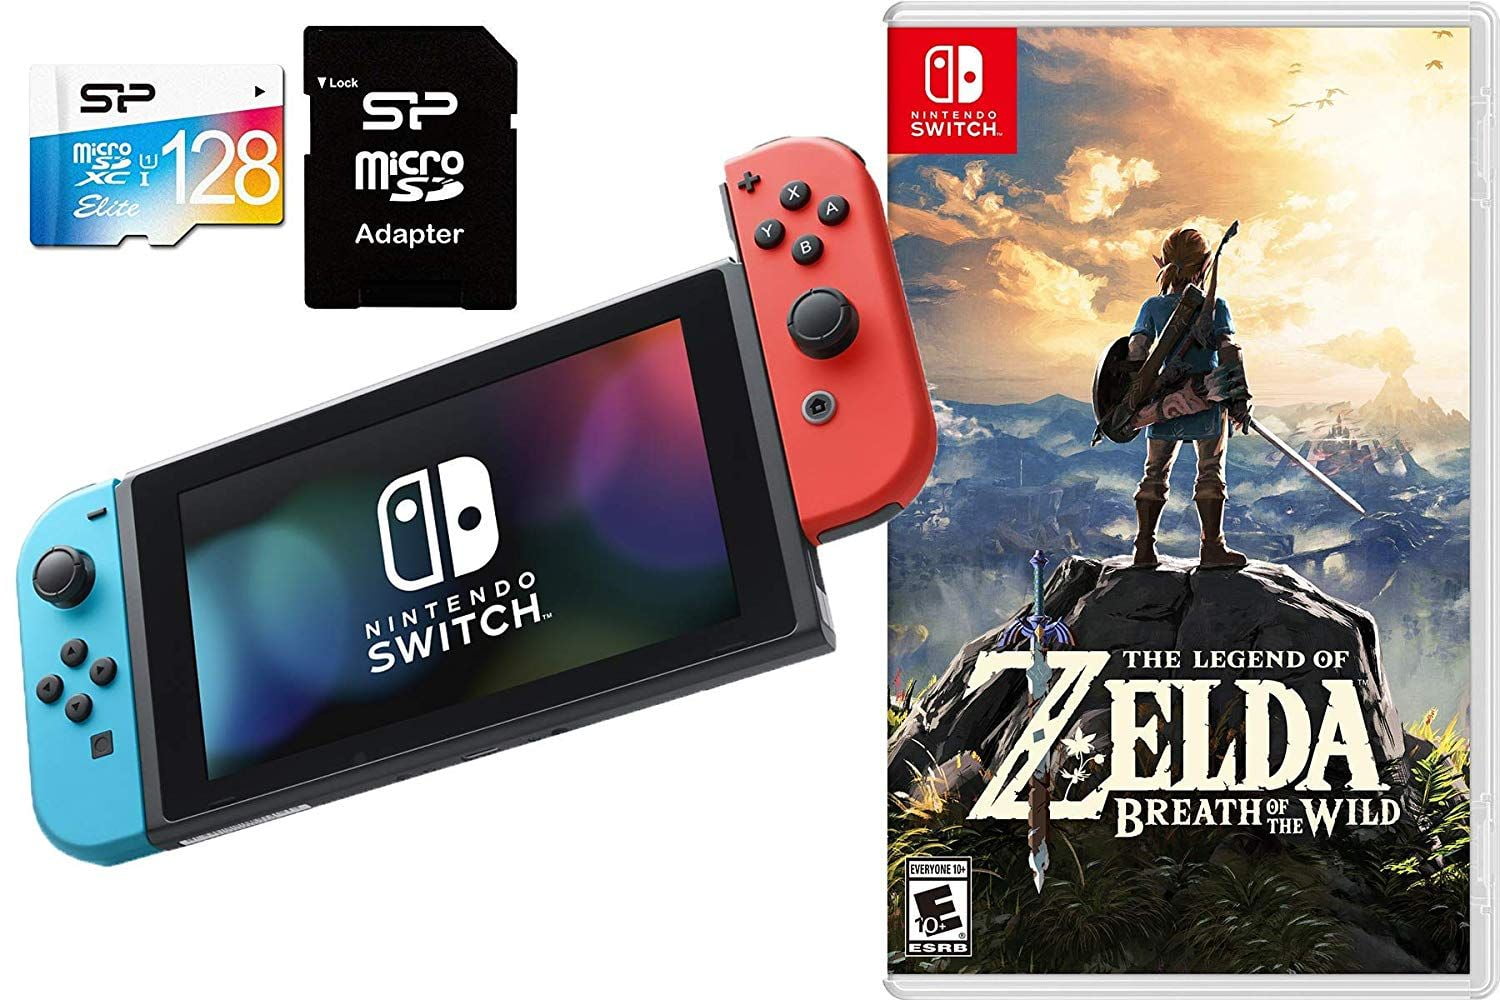 Breath of the Wild gets an Explorer's Edition bundle